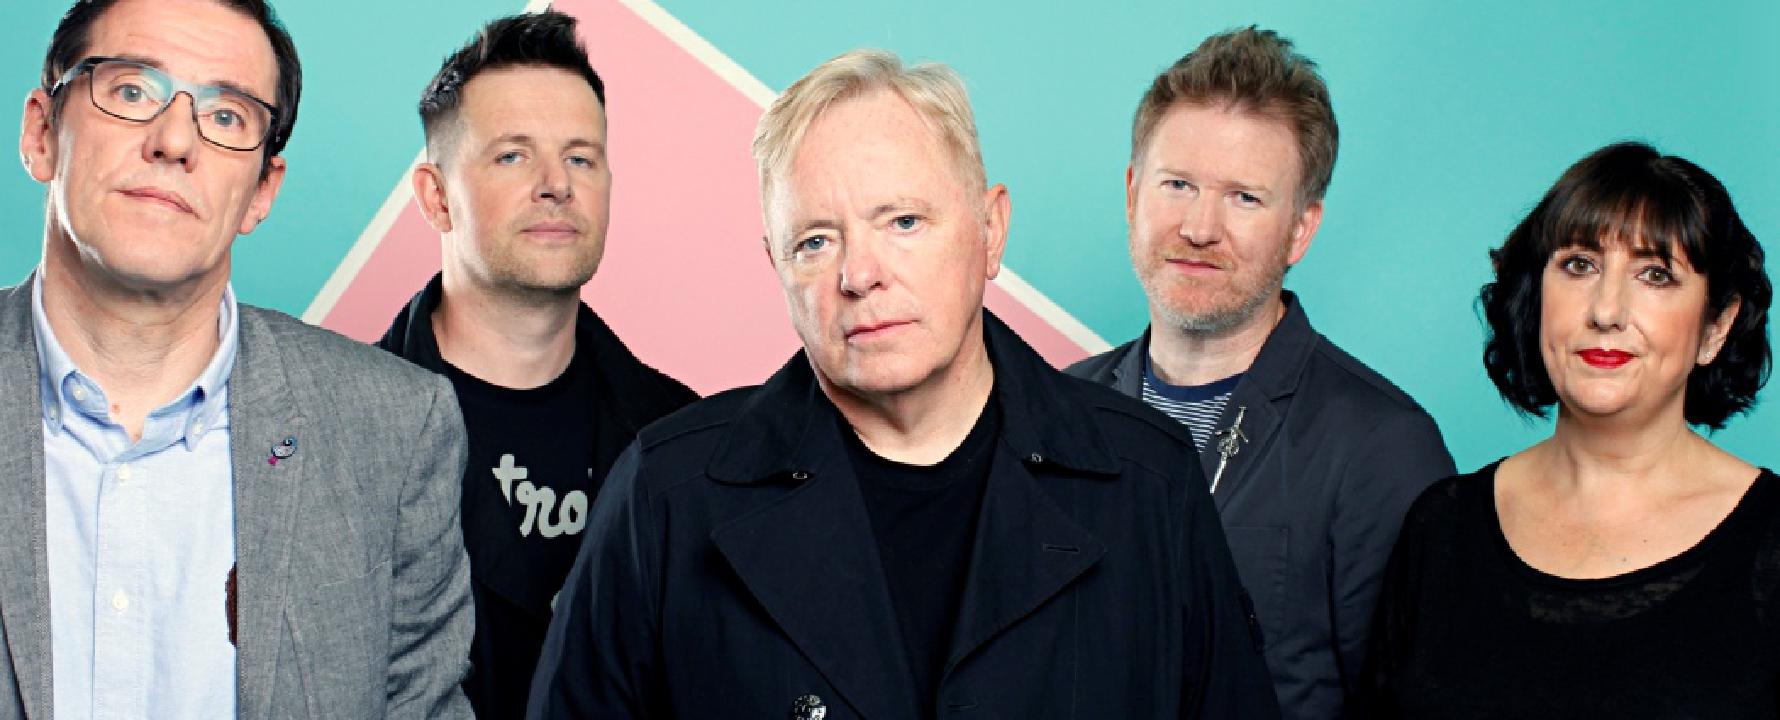 Promotional photograph of New Order.